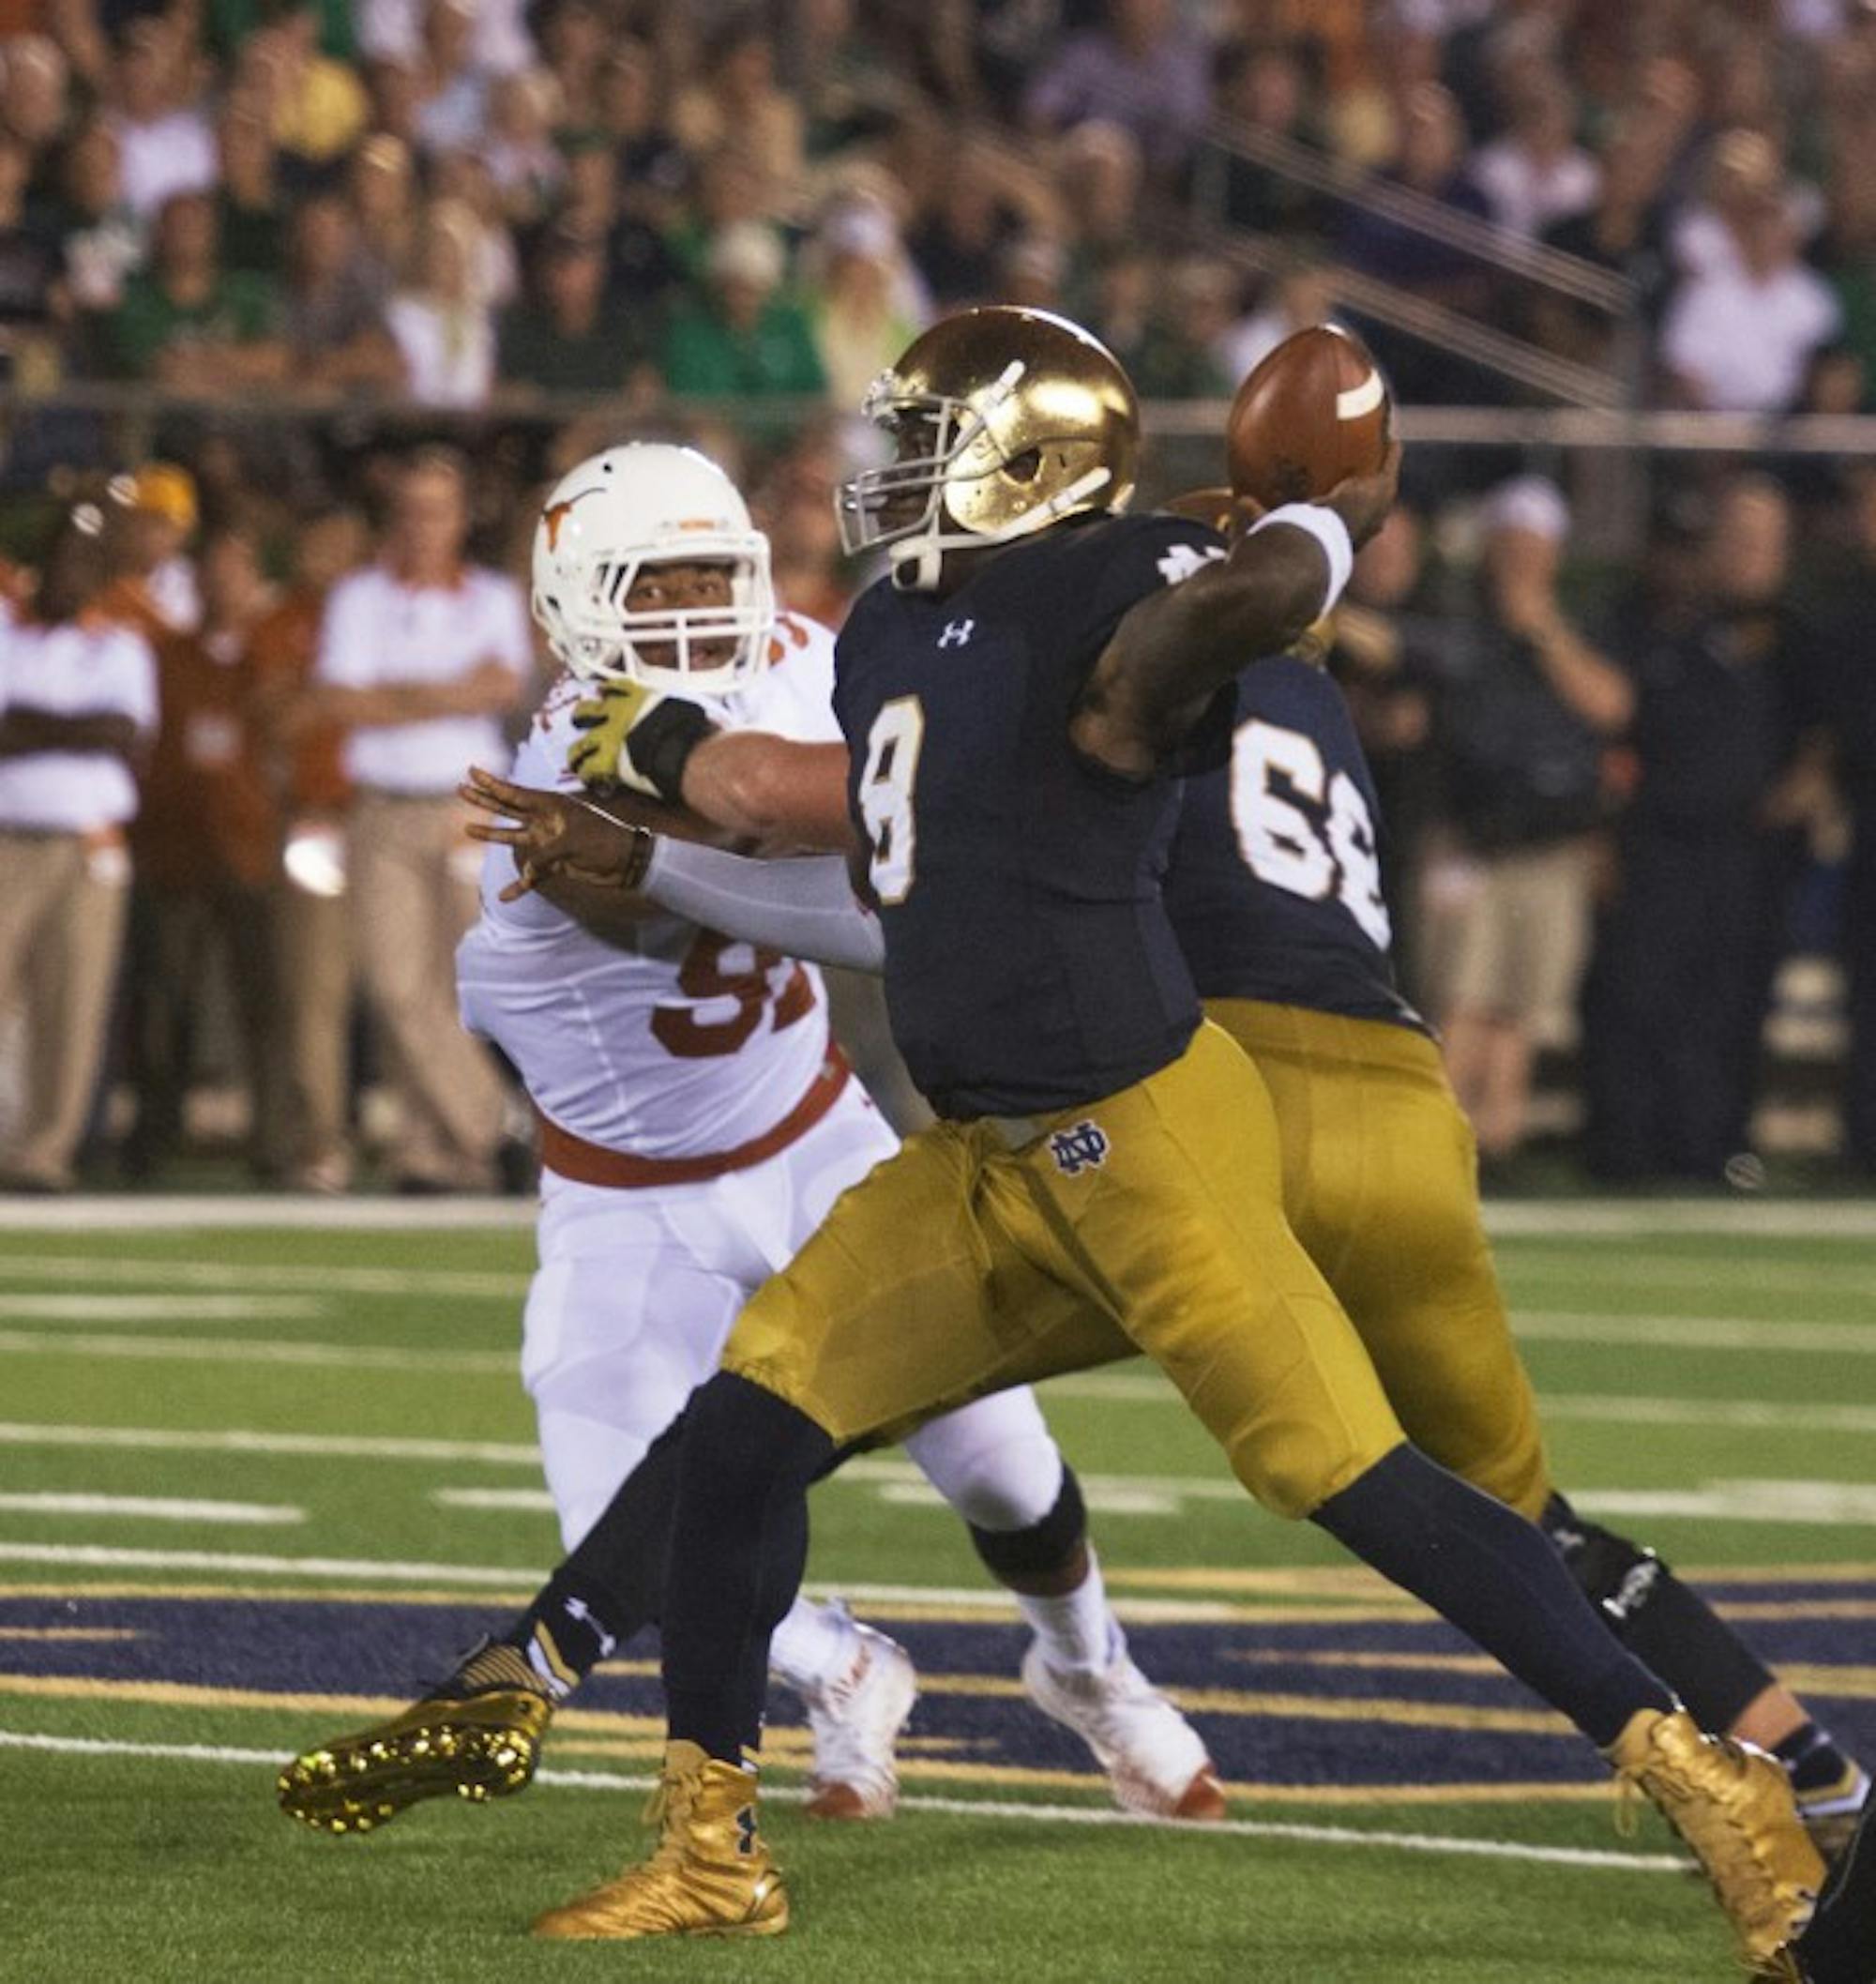 Senior quarterback Malik Zaire winds up for a pass during Notre Dame’s 38-3 win over Texas on Sept. 12.